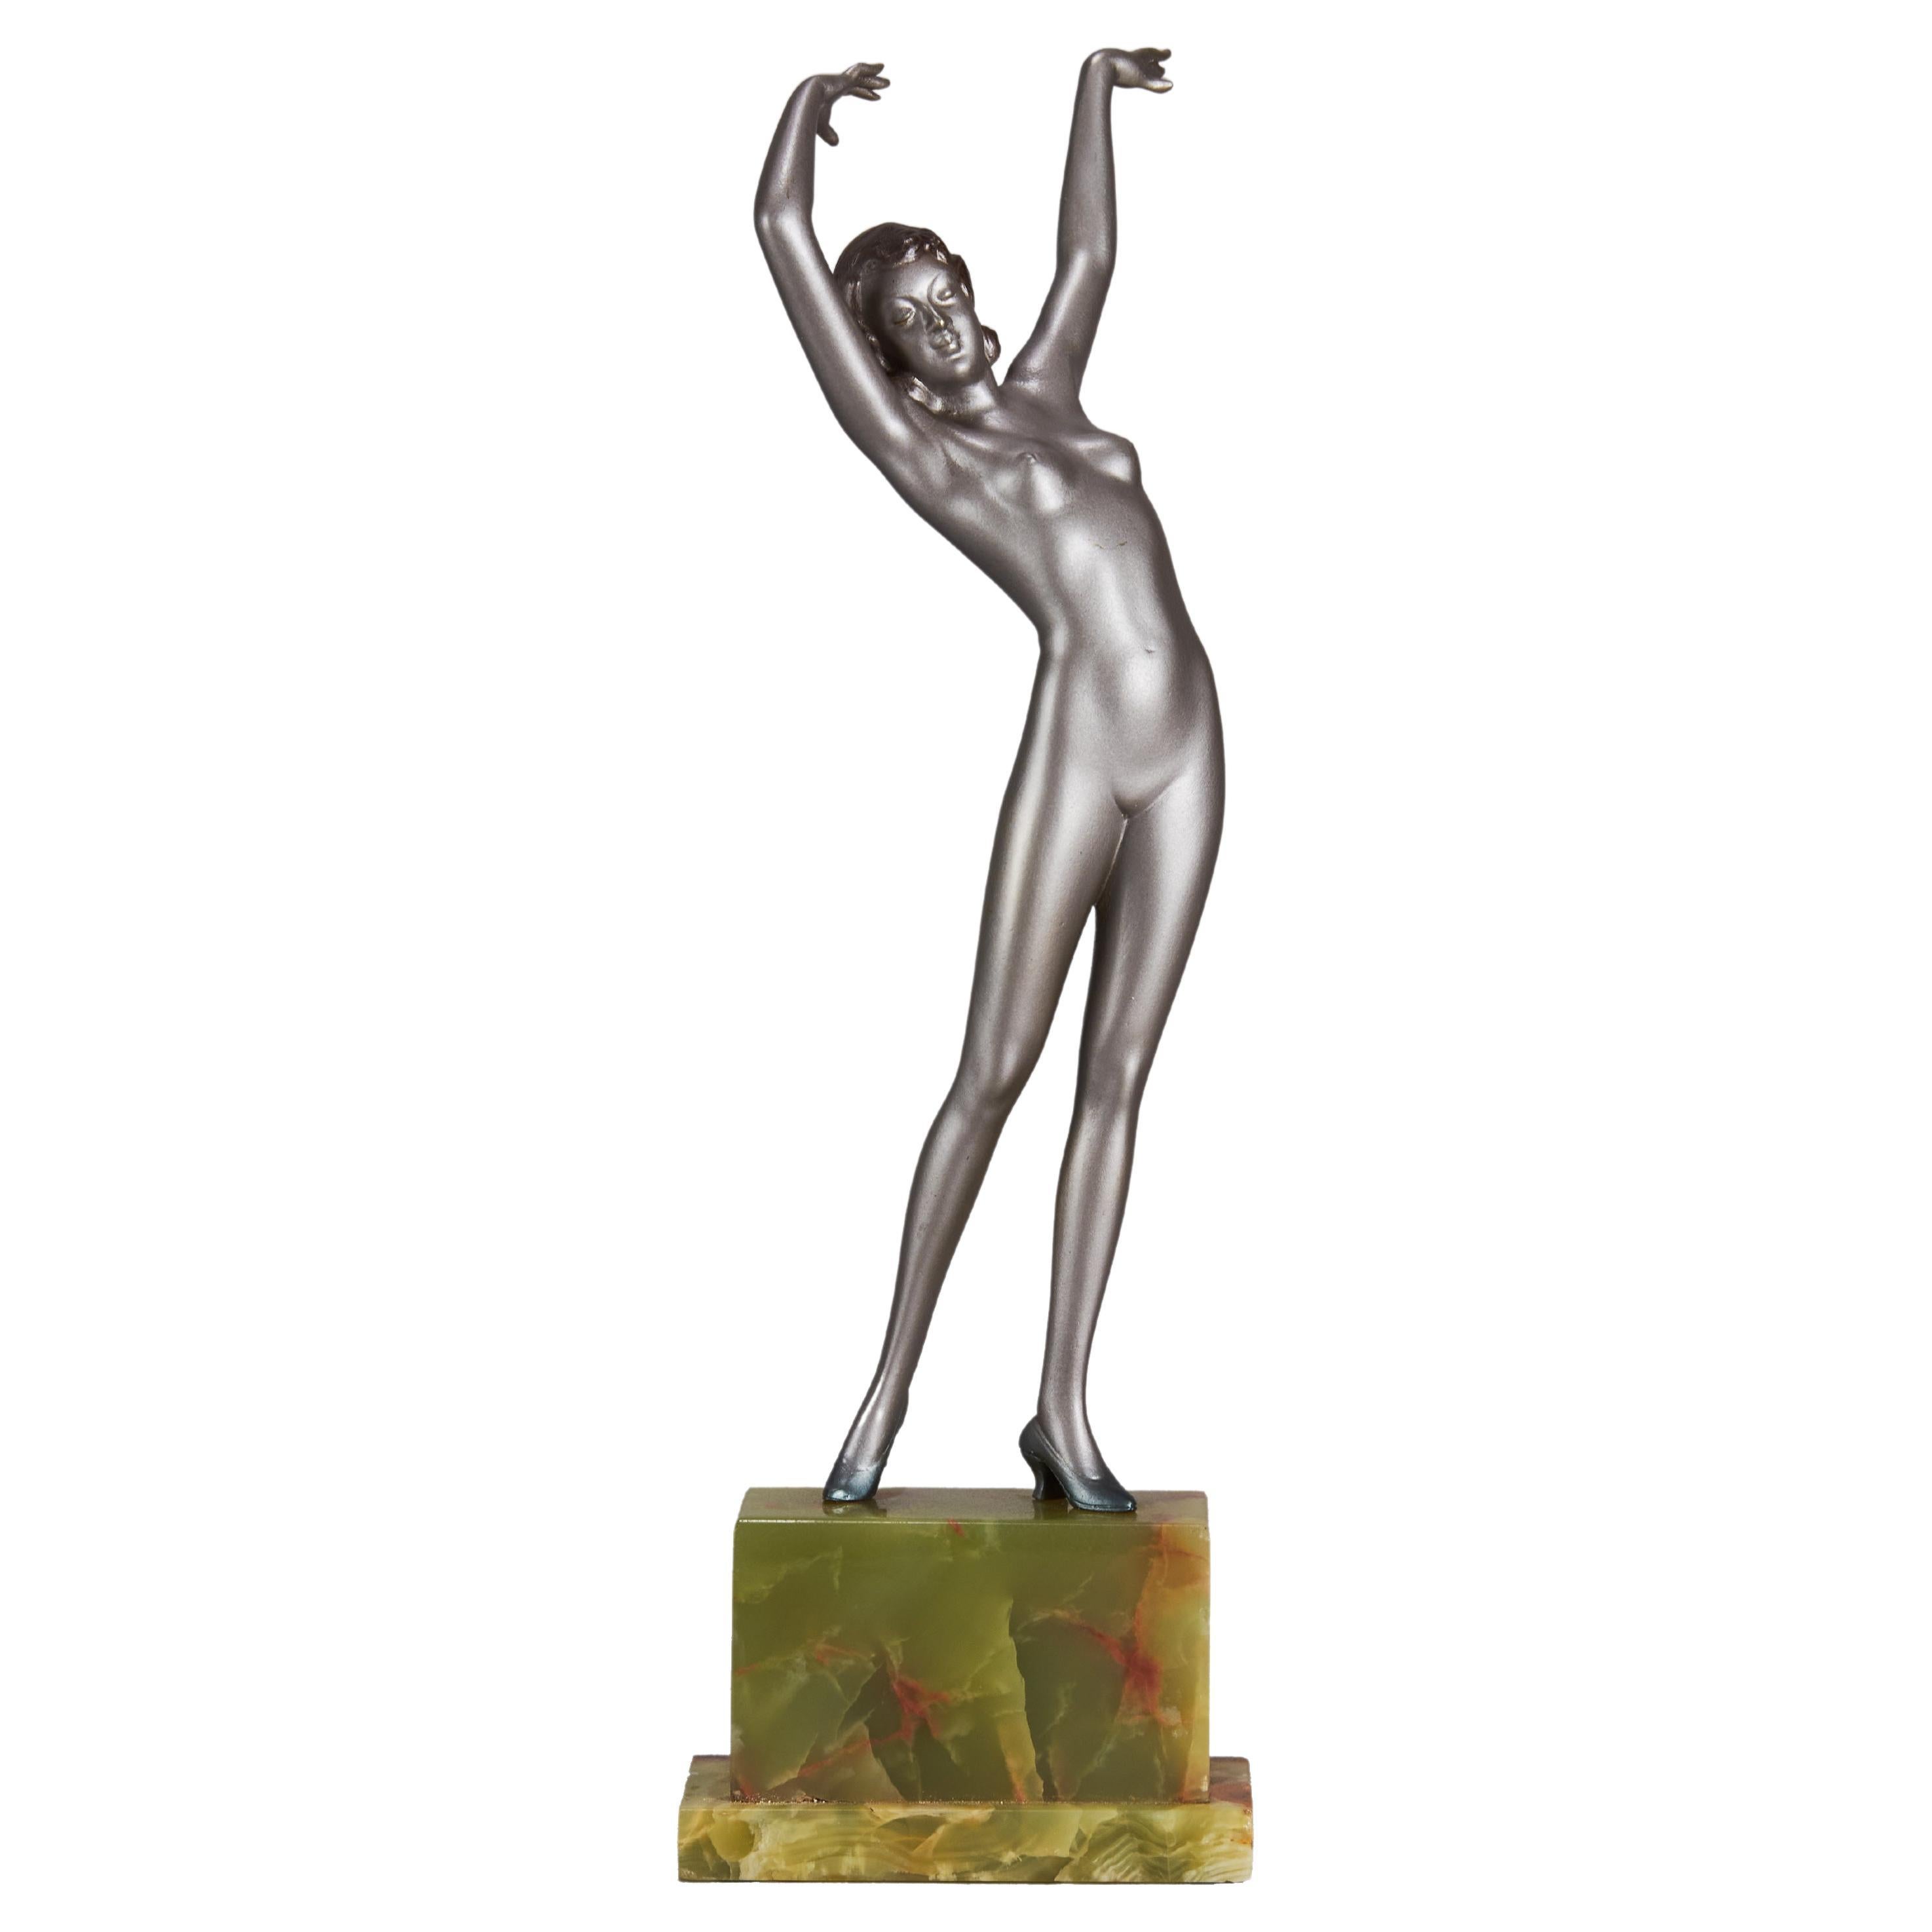 Early 20th Century Cold-Painted Bronze Entitled "Outstretched Dancer" by Lorenzl For Sale